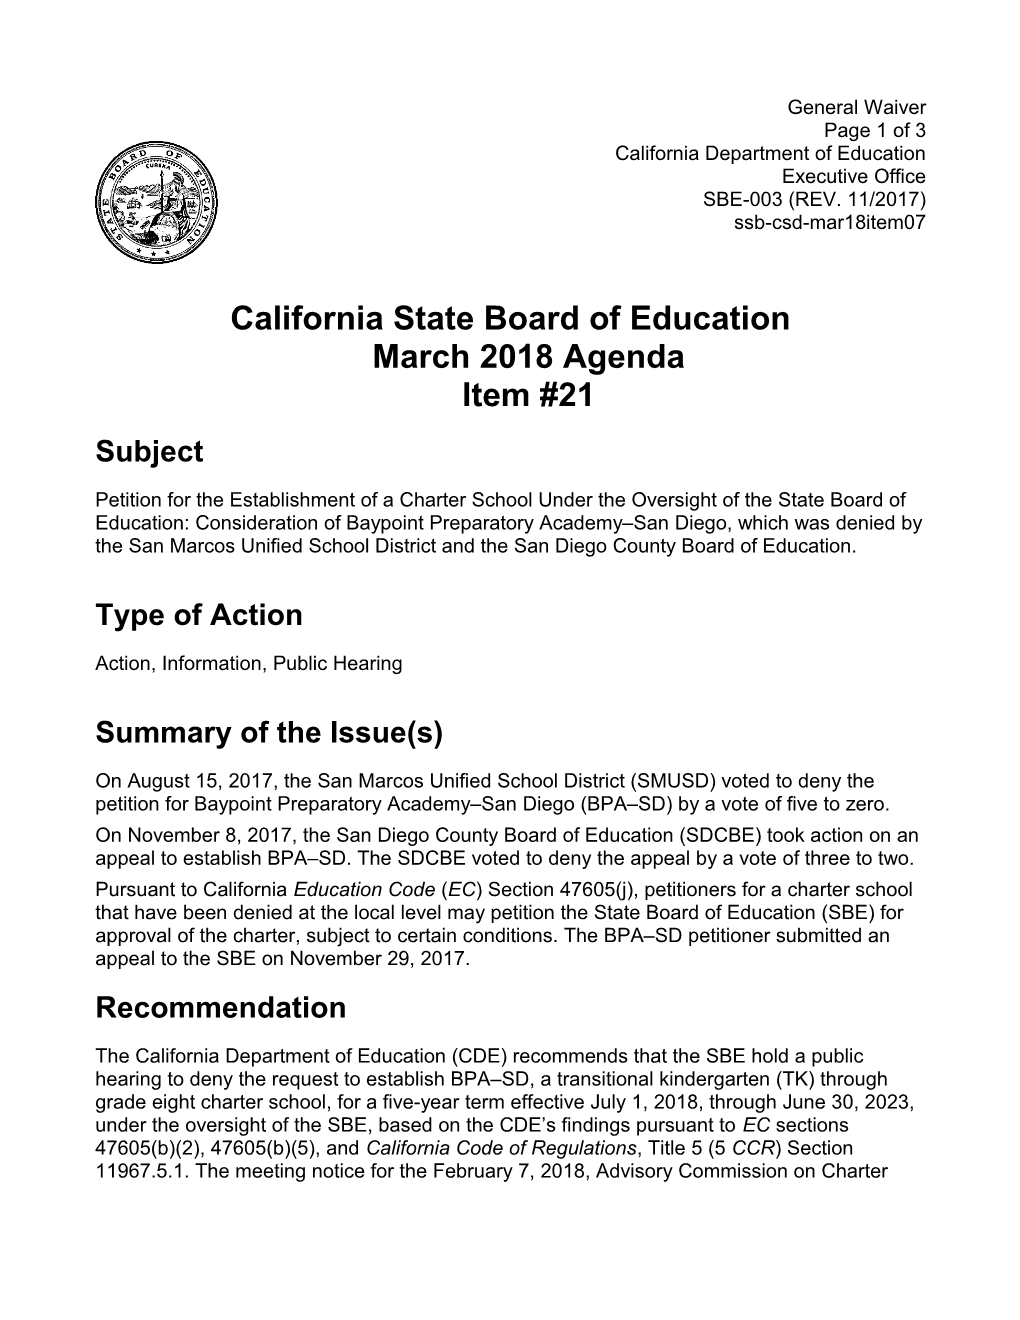 March 2018 Agenda Item 21 - Meeting Agendas (CA State Board of Education)